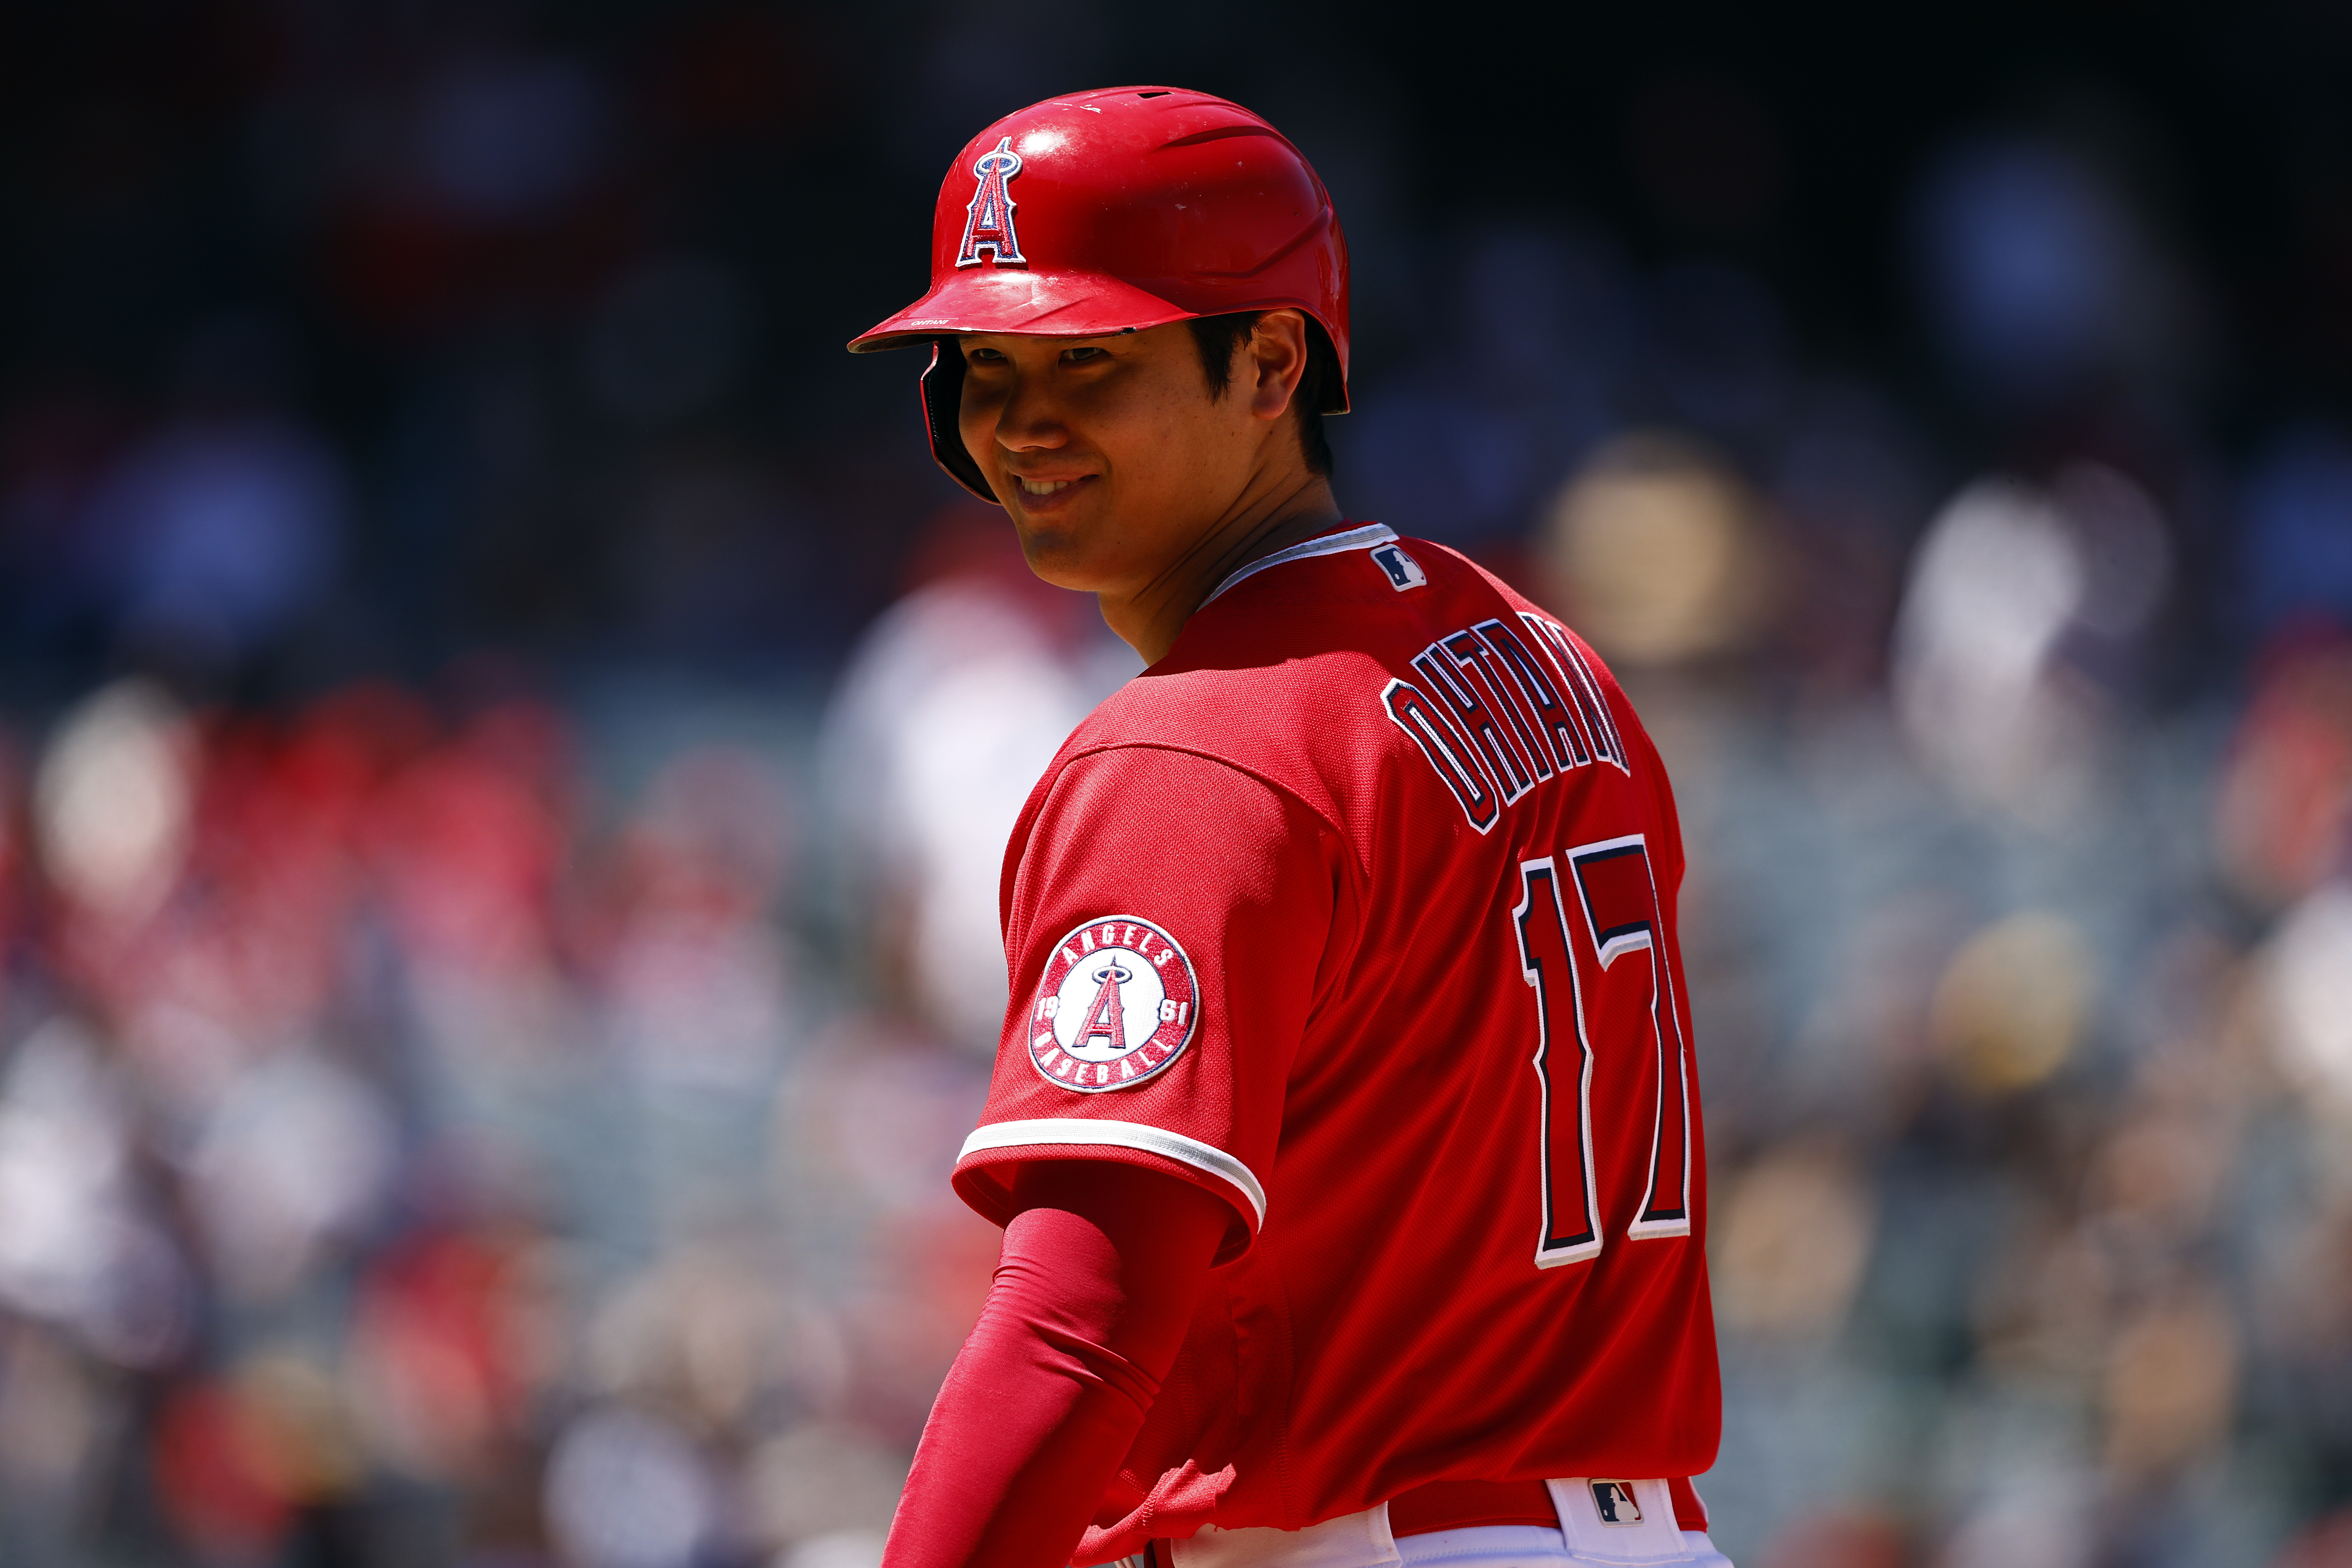 Shohei Ohtani Is Showing His Potential to Carry Baseball to New